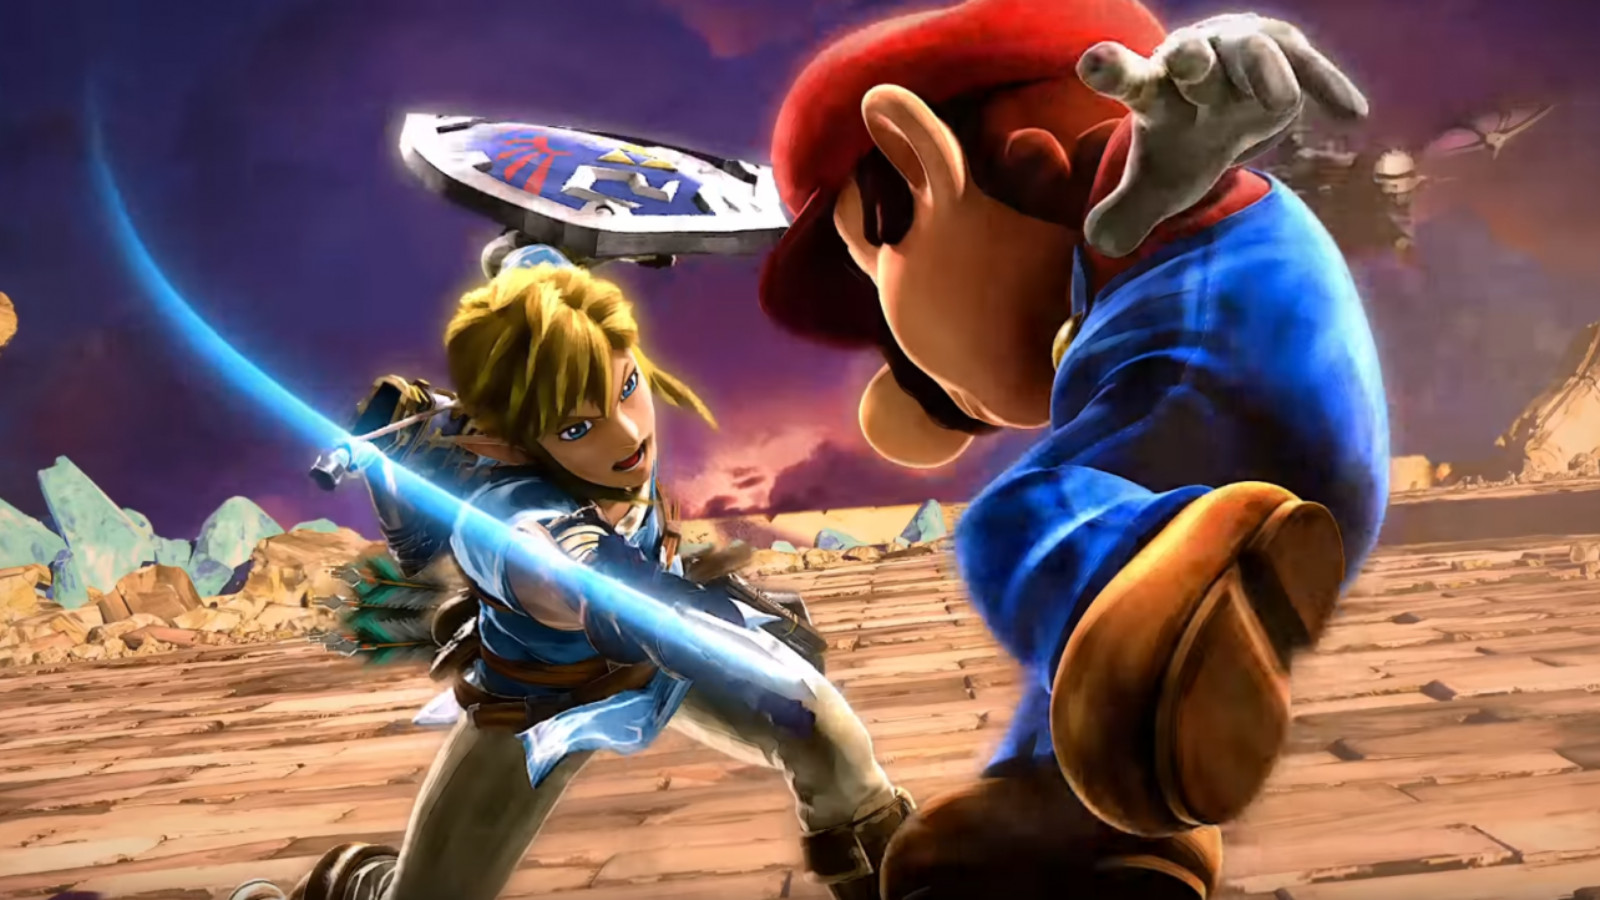 Nintendo breaks silence on supporting Smash esports after shutting down tournaments